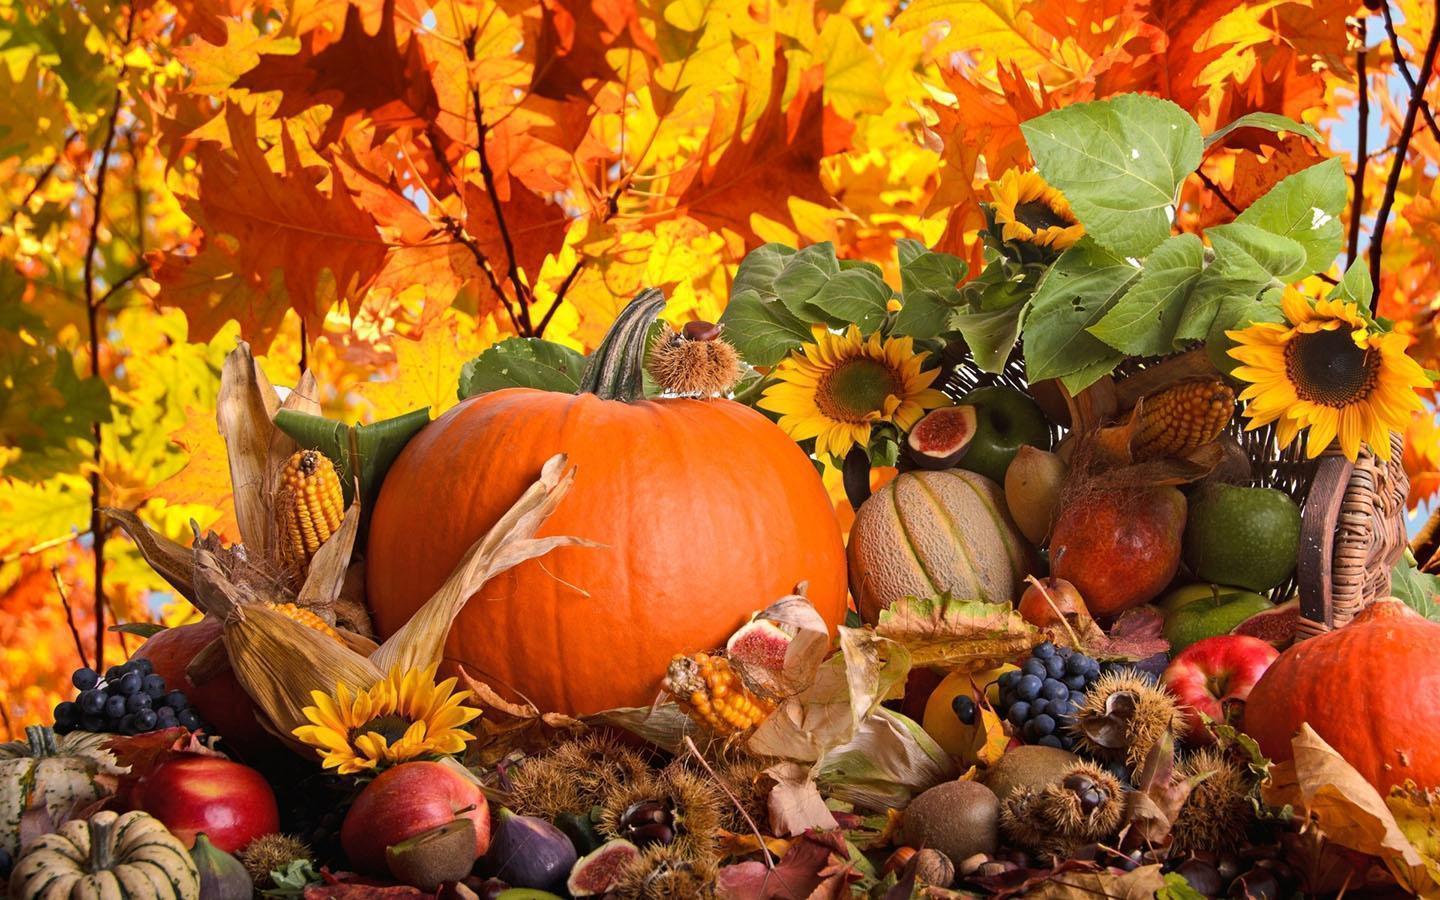 Thanksgiving Day Wallpaper Apps on Google Play